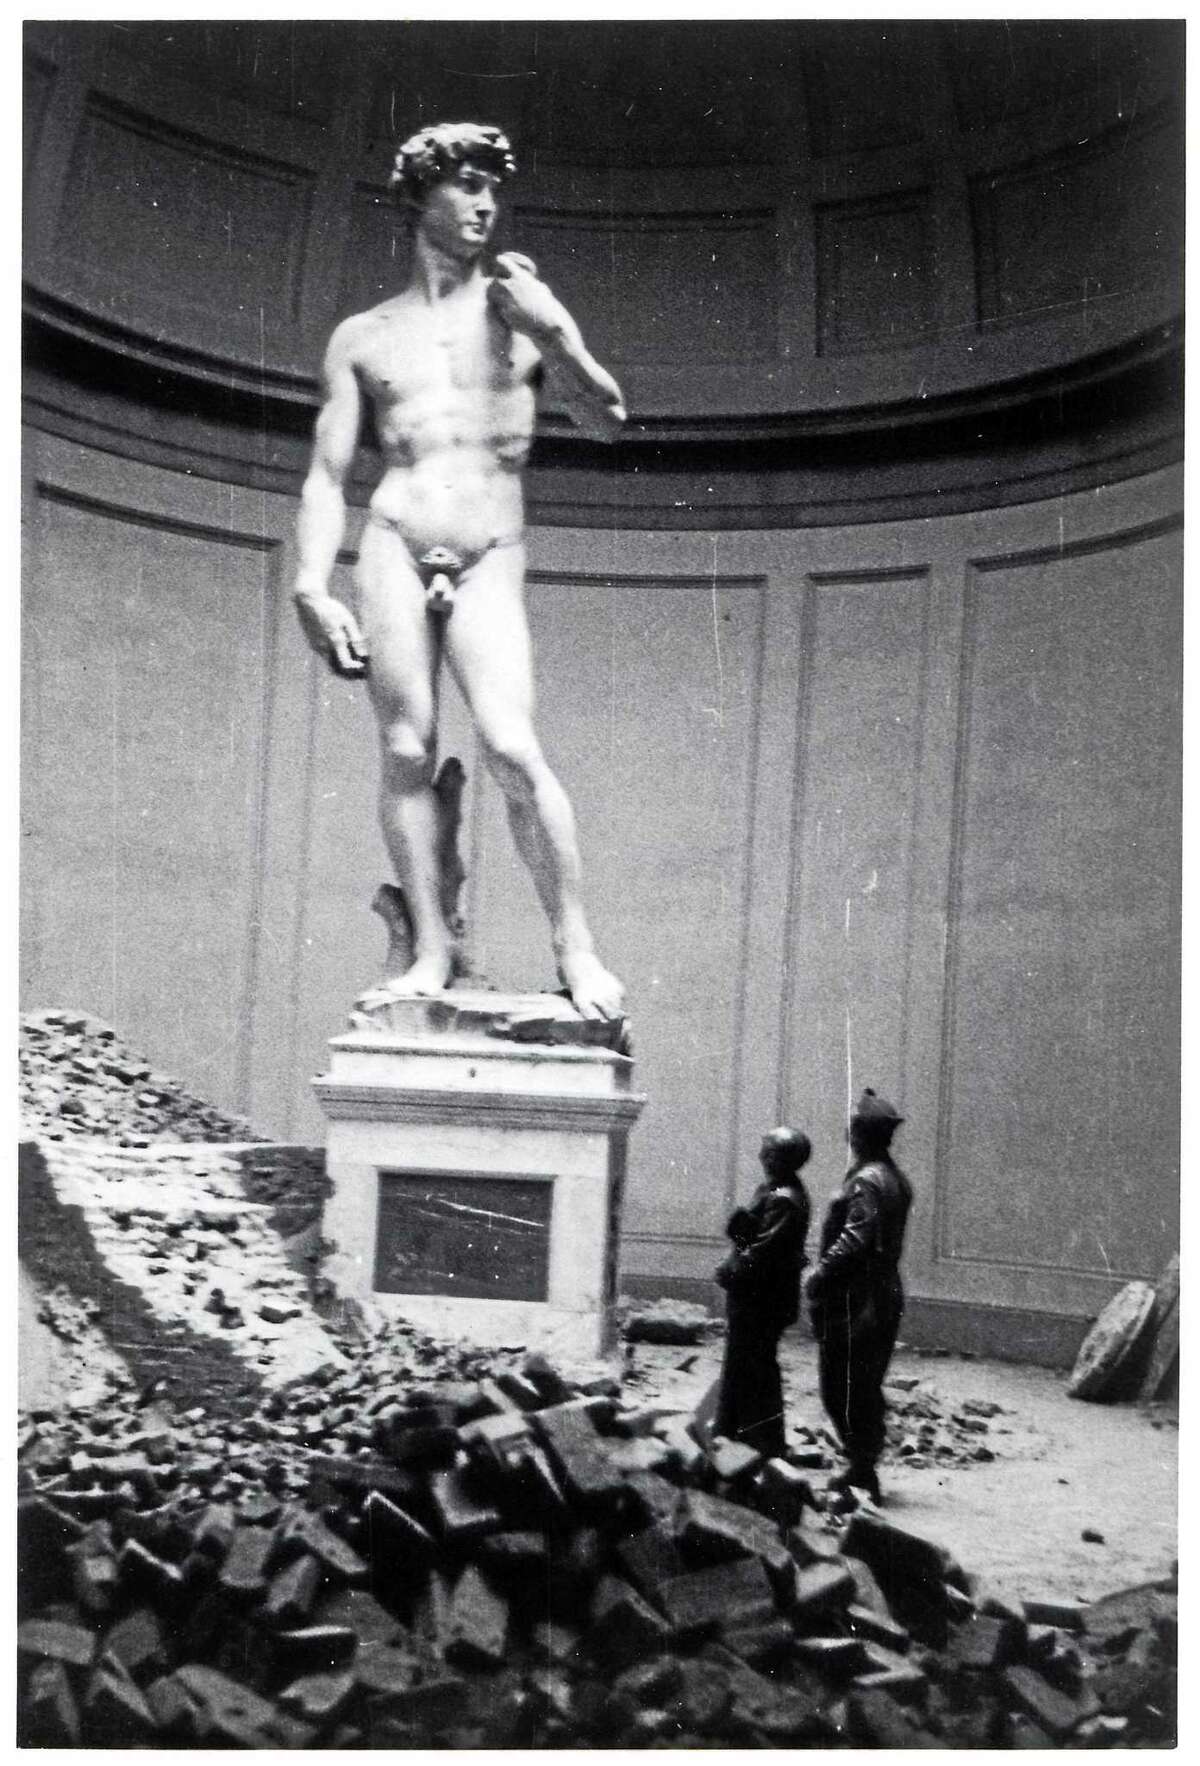 Deane Keller (right) with his driver, Charlie Bernholz, admiring the statue of David in Florence in 1945. (Courtesy of Manuscripts and Archives, Yale University Library)